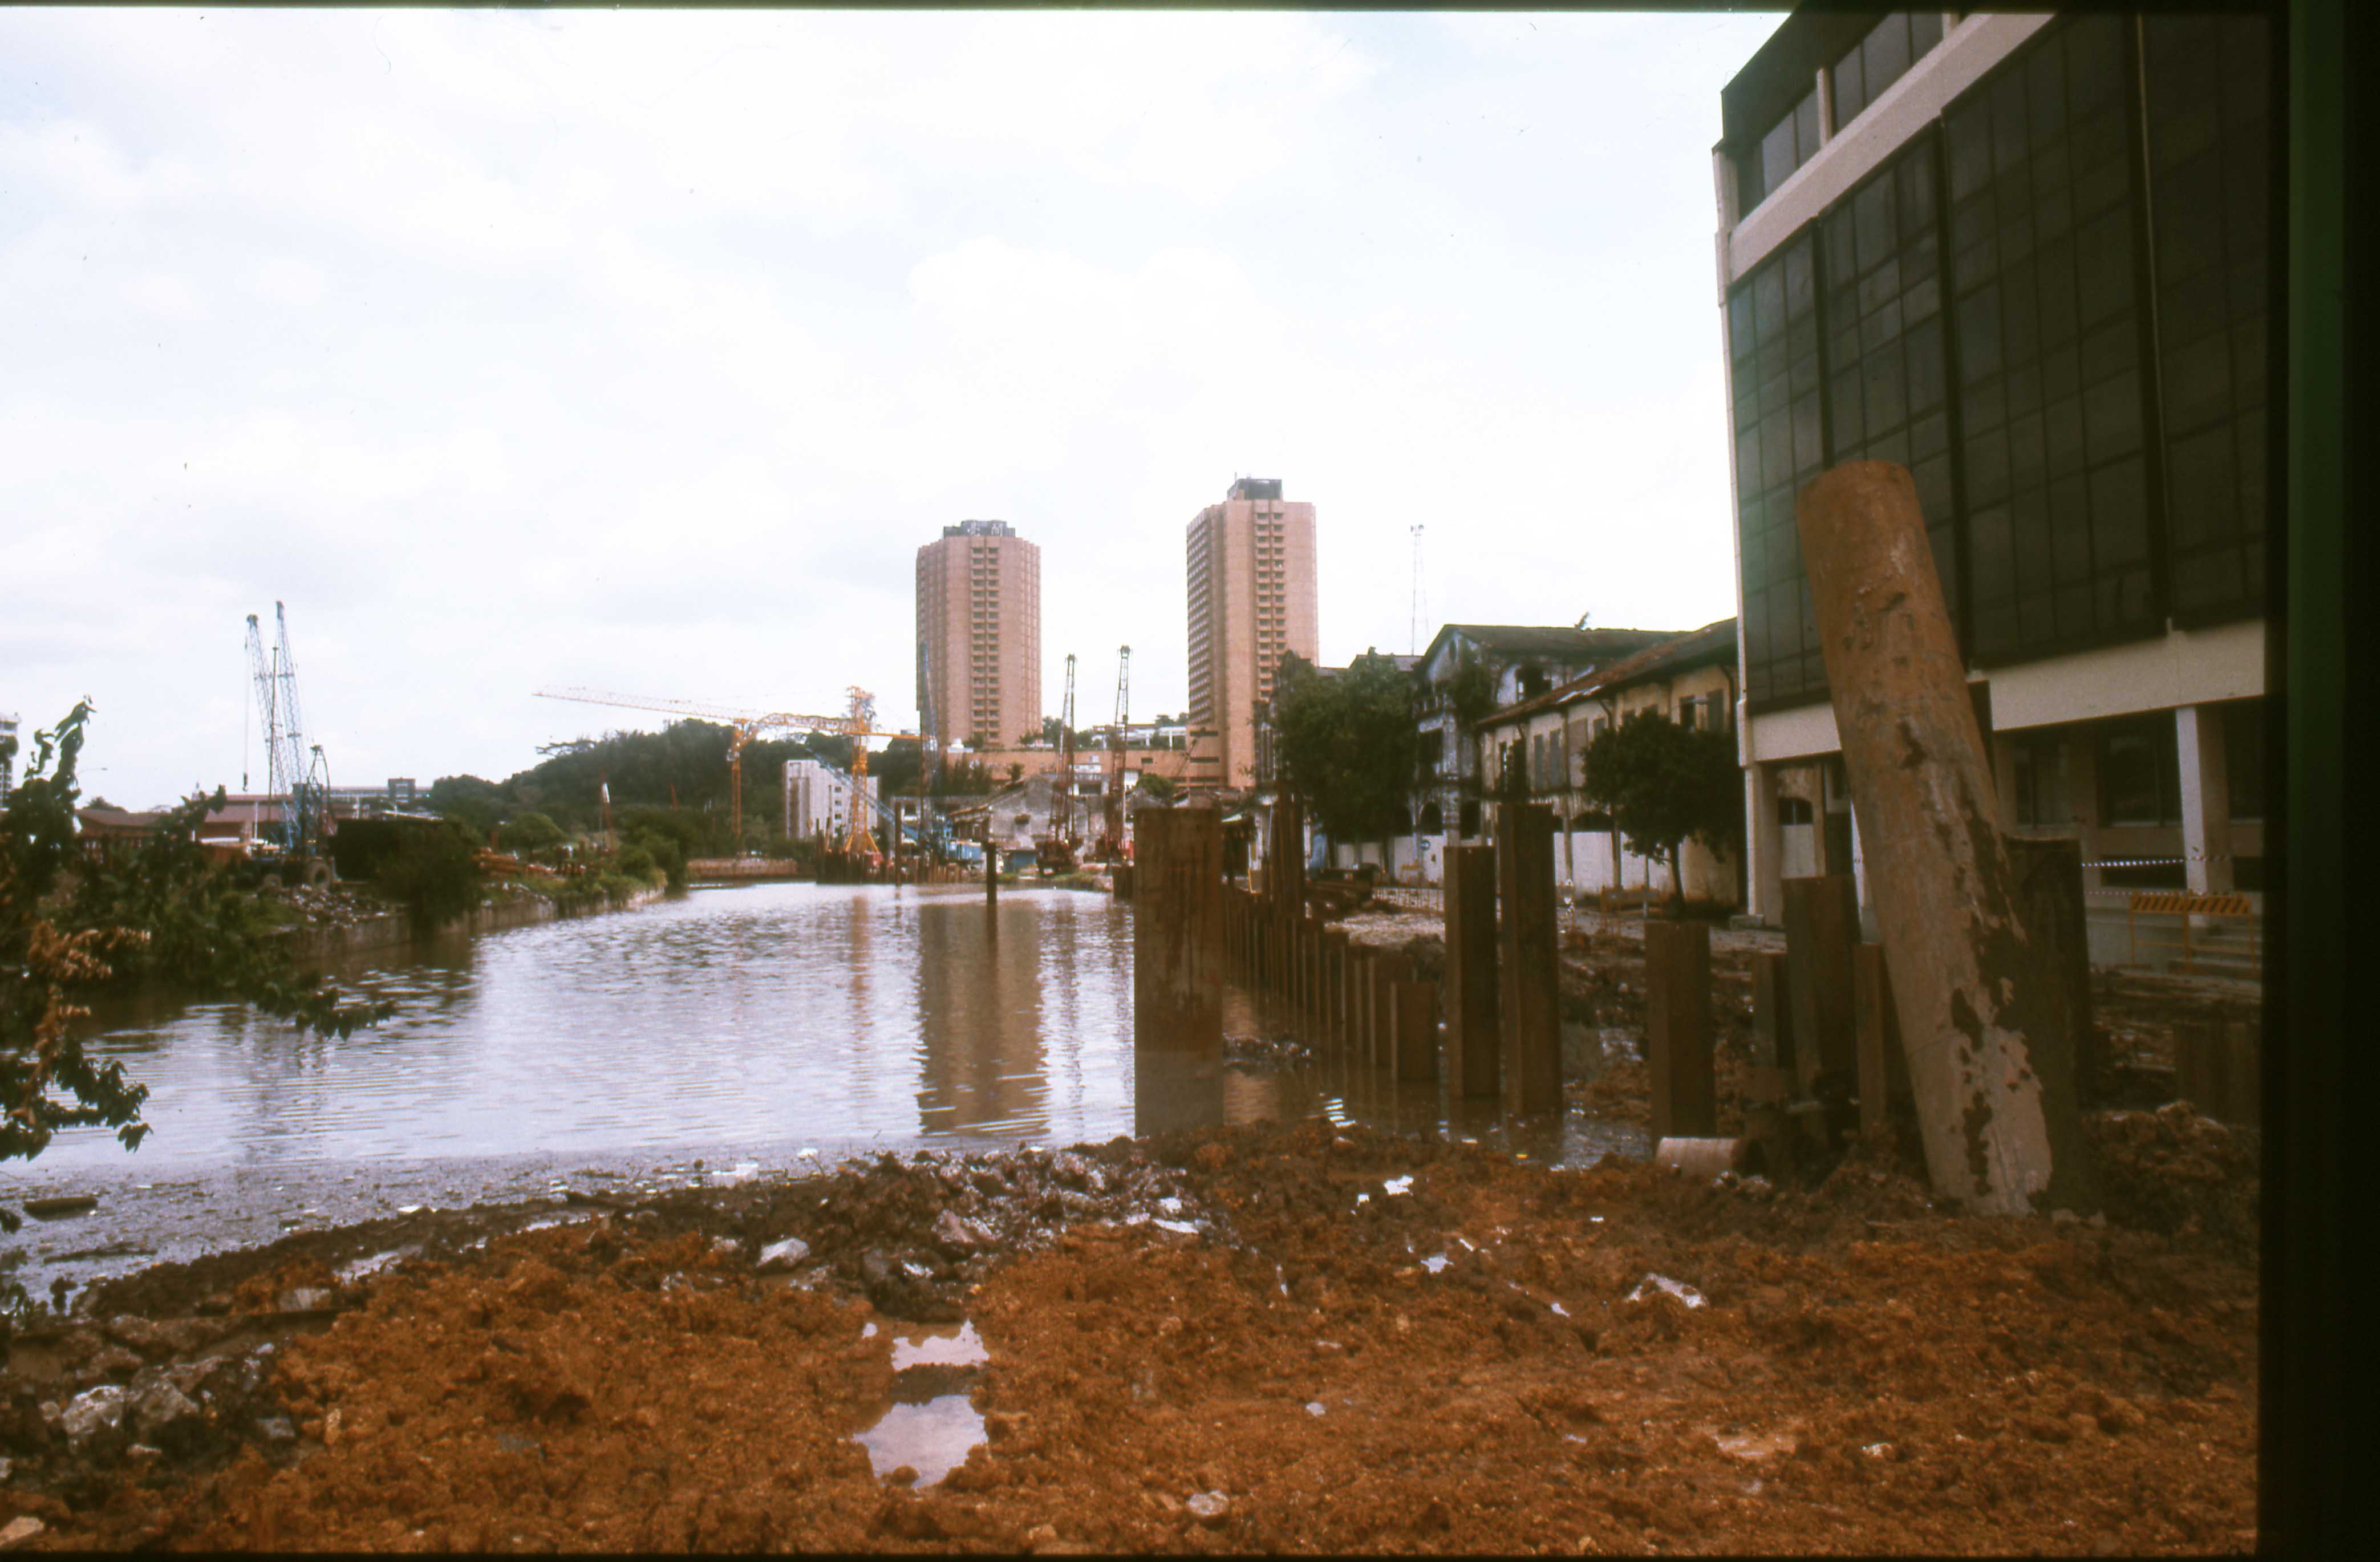 Fig. 1 East arm of the Singapore River 1988